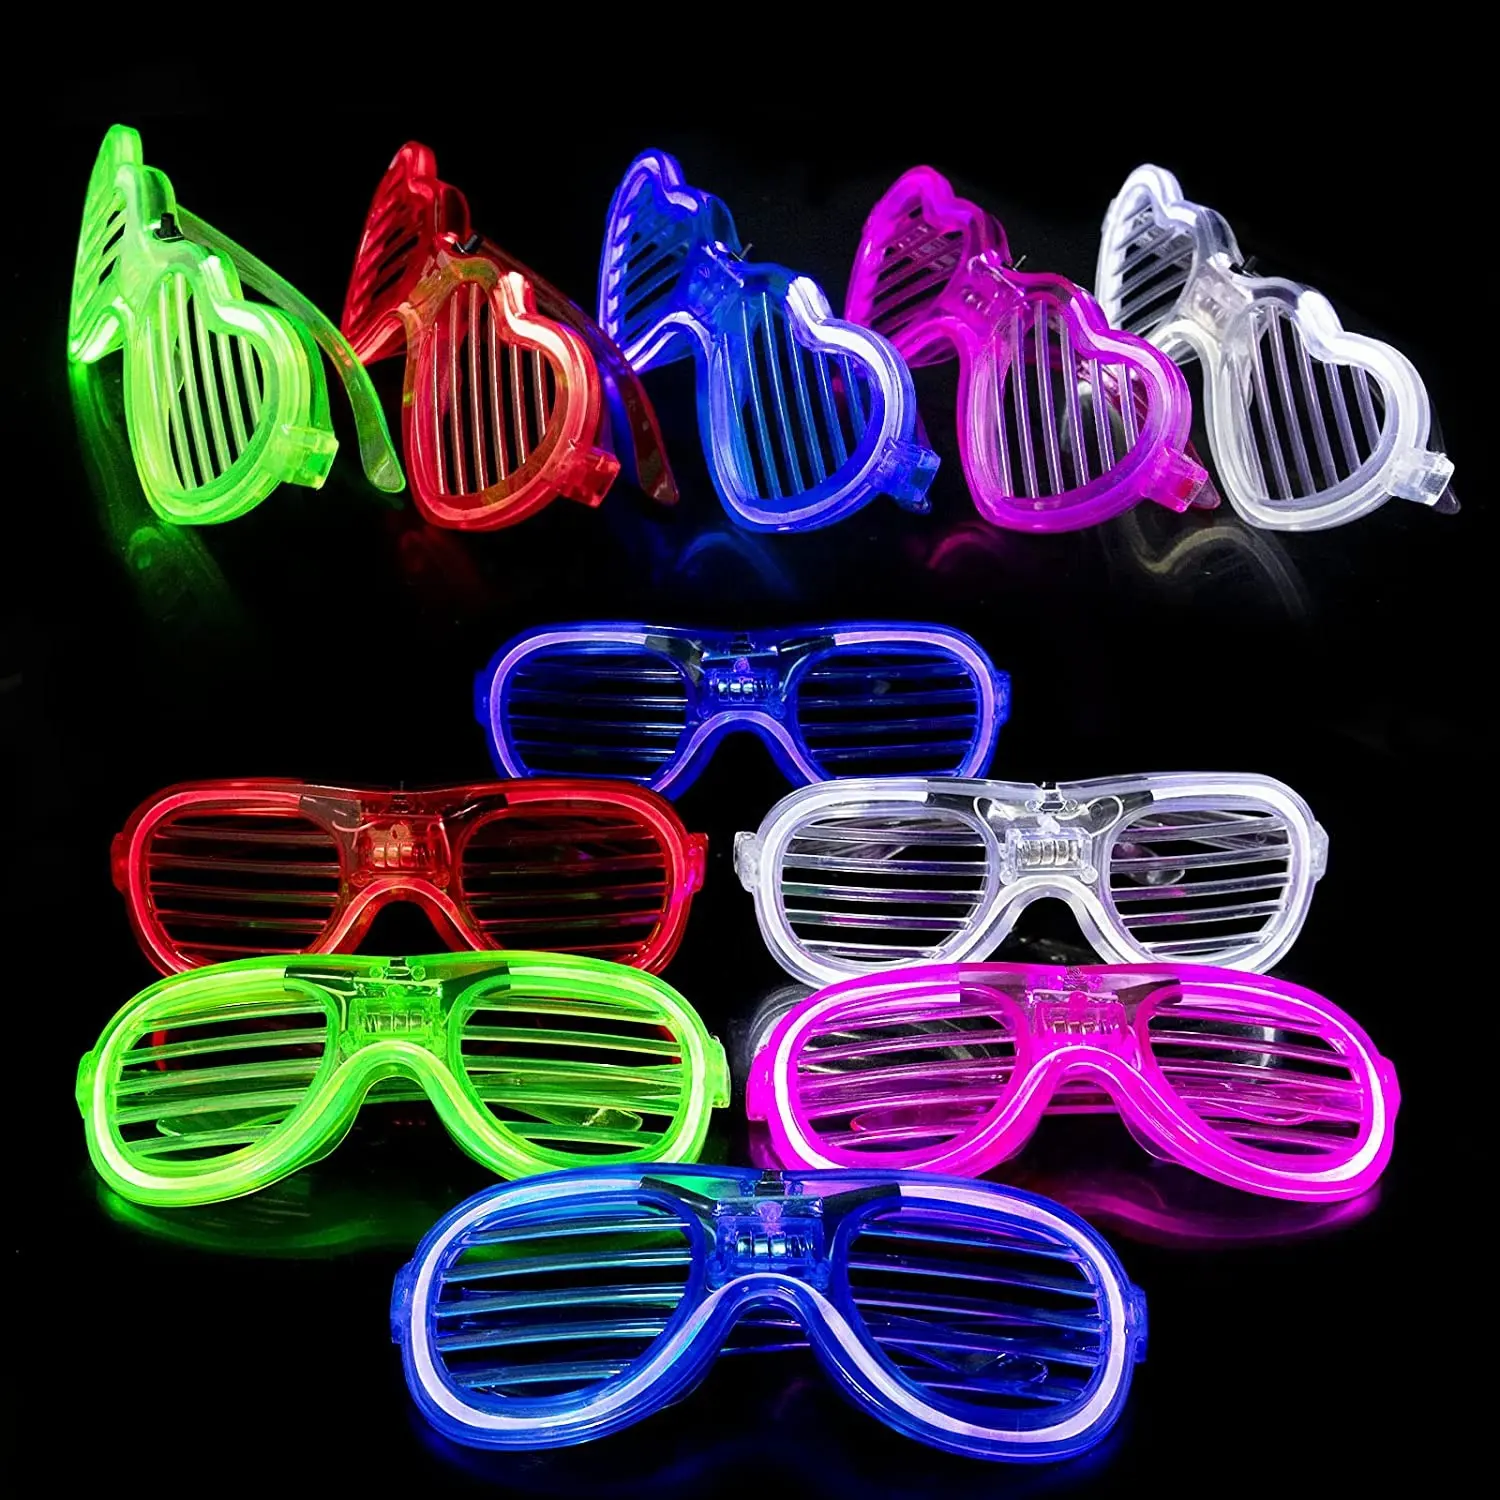 Party Supplies LED Glasses 5 Colors Light Up Glasses Shutter Shades Glow Sticks Glasses Led Party Sunglasses Glow In Dark